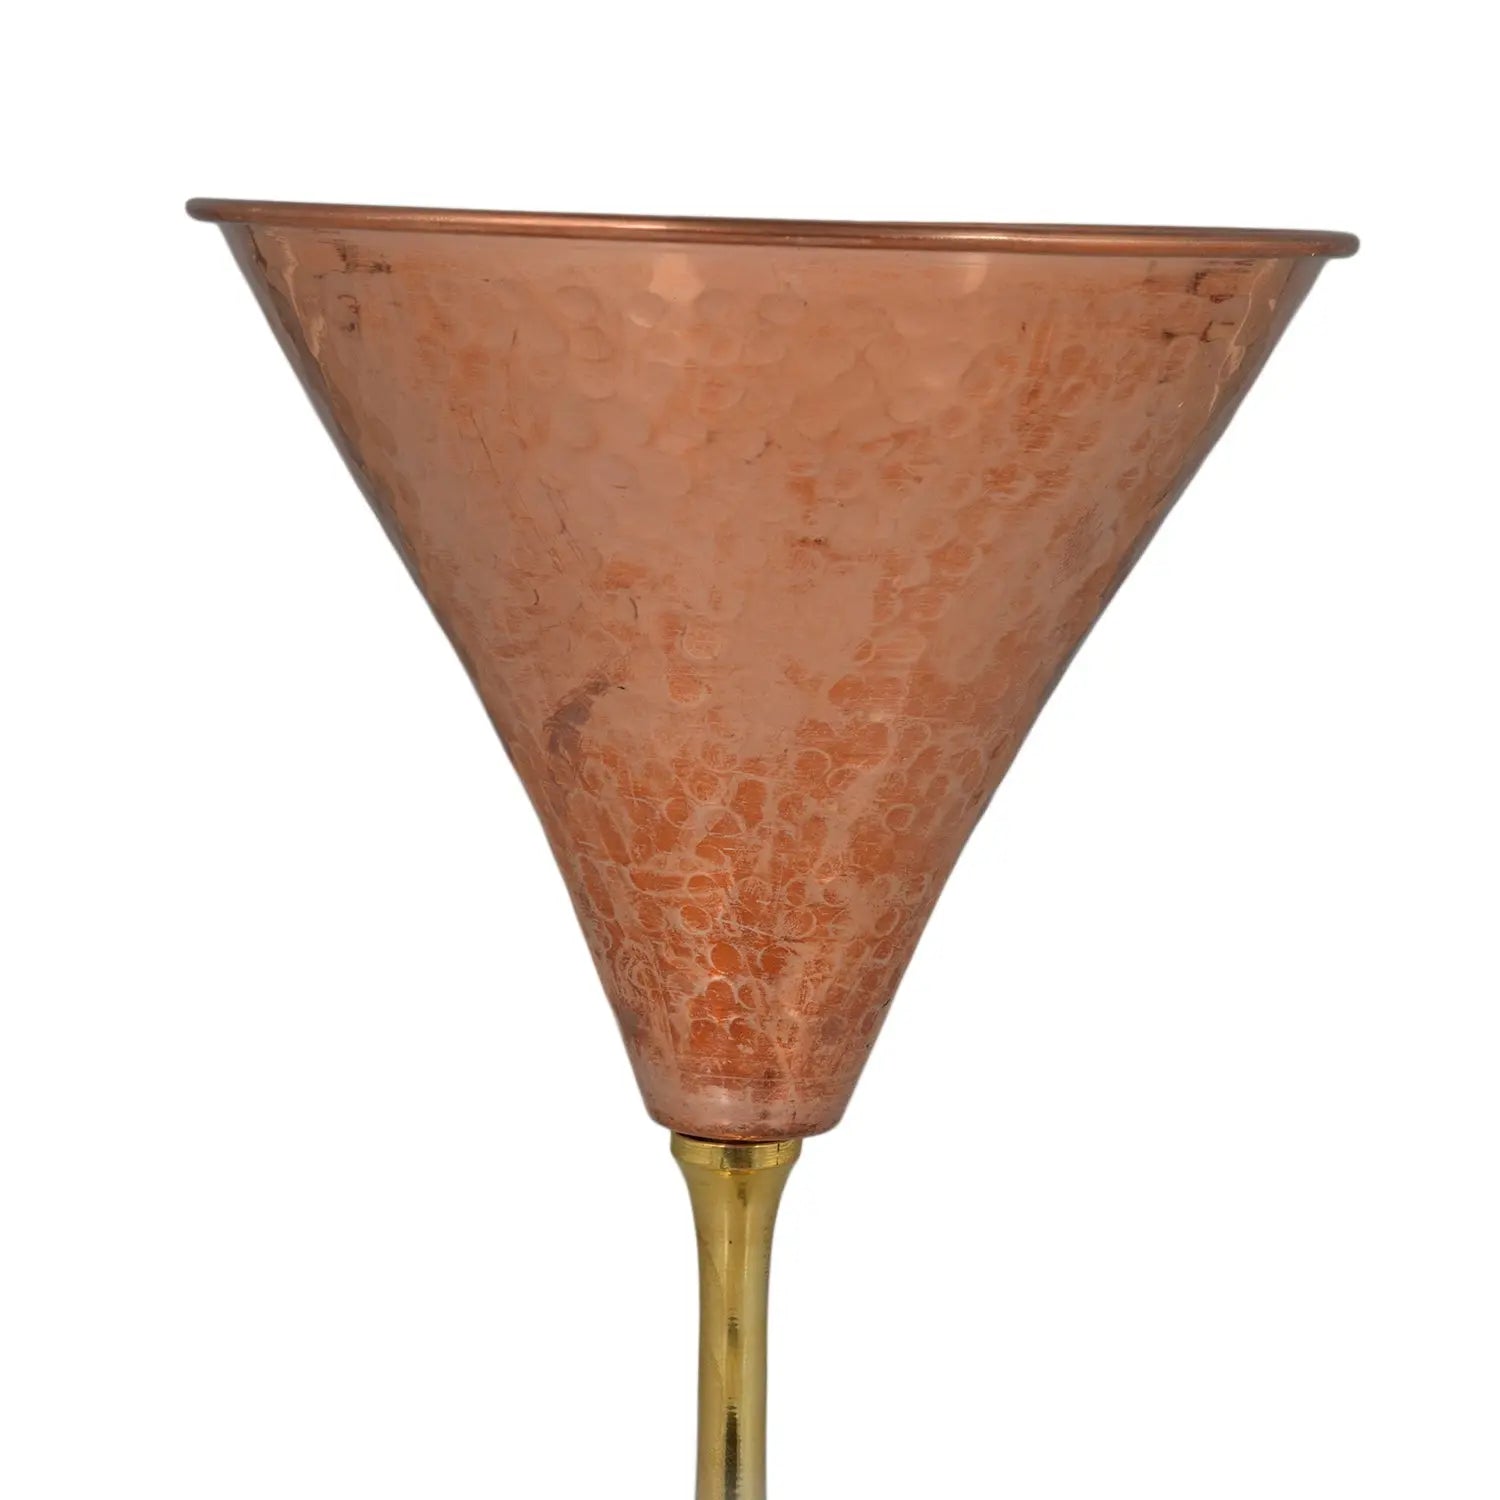 Copper Martini Glass Hammered Brass Martini Glass With Brass Stand - CROCKERY WALA AND COMPANY 